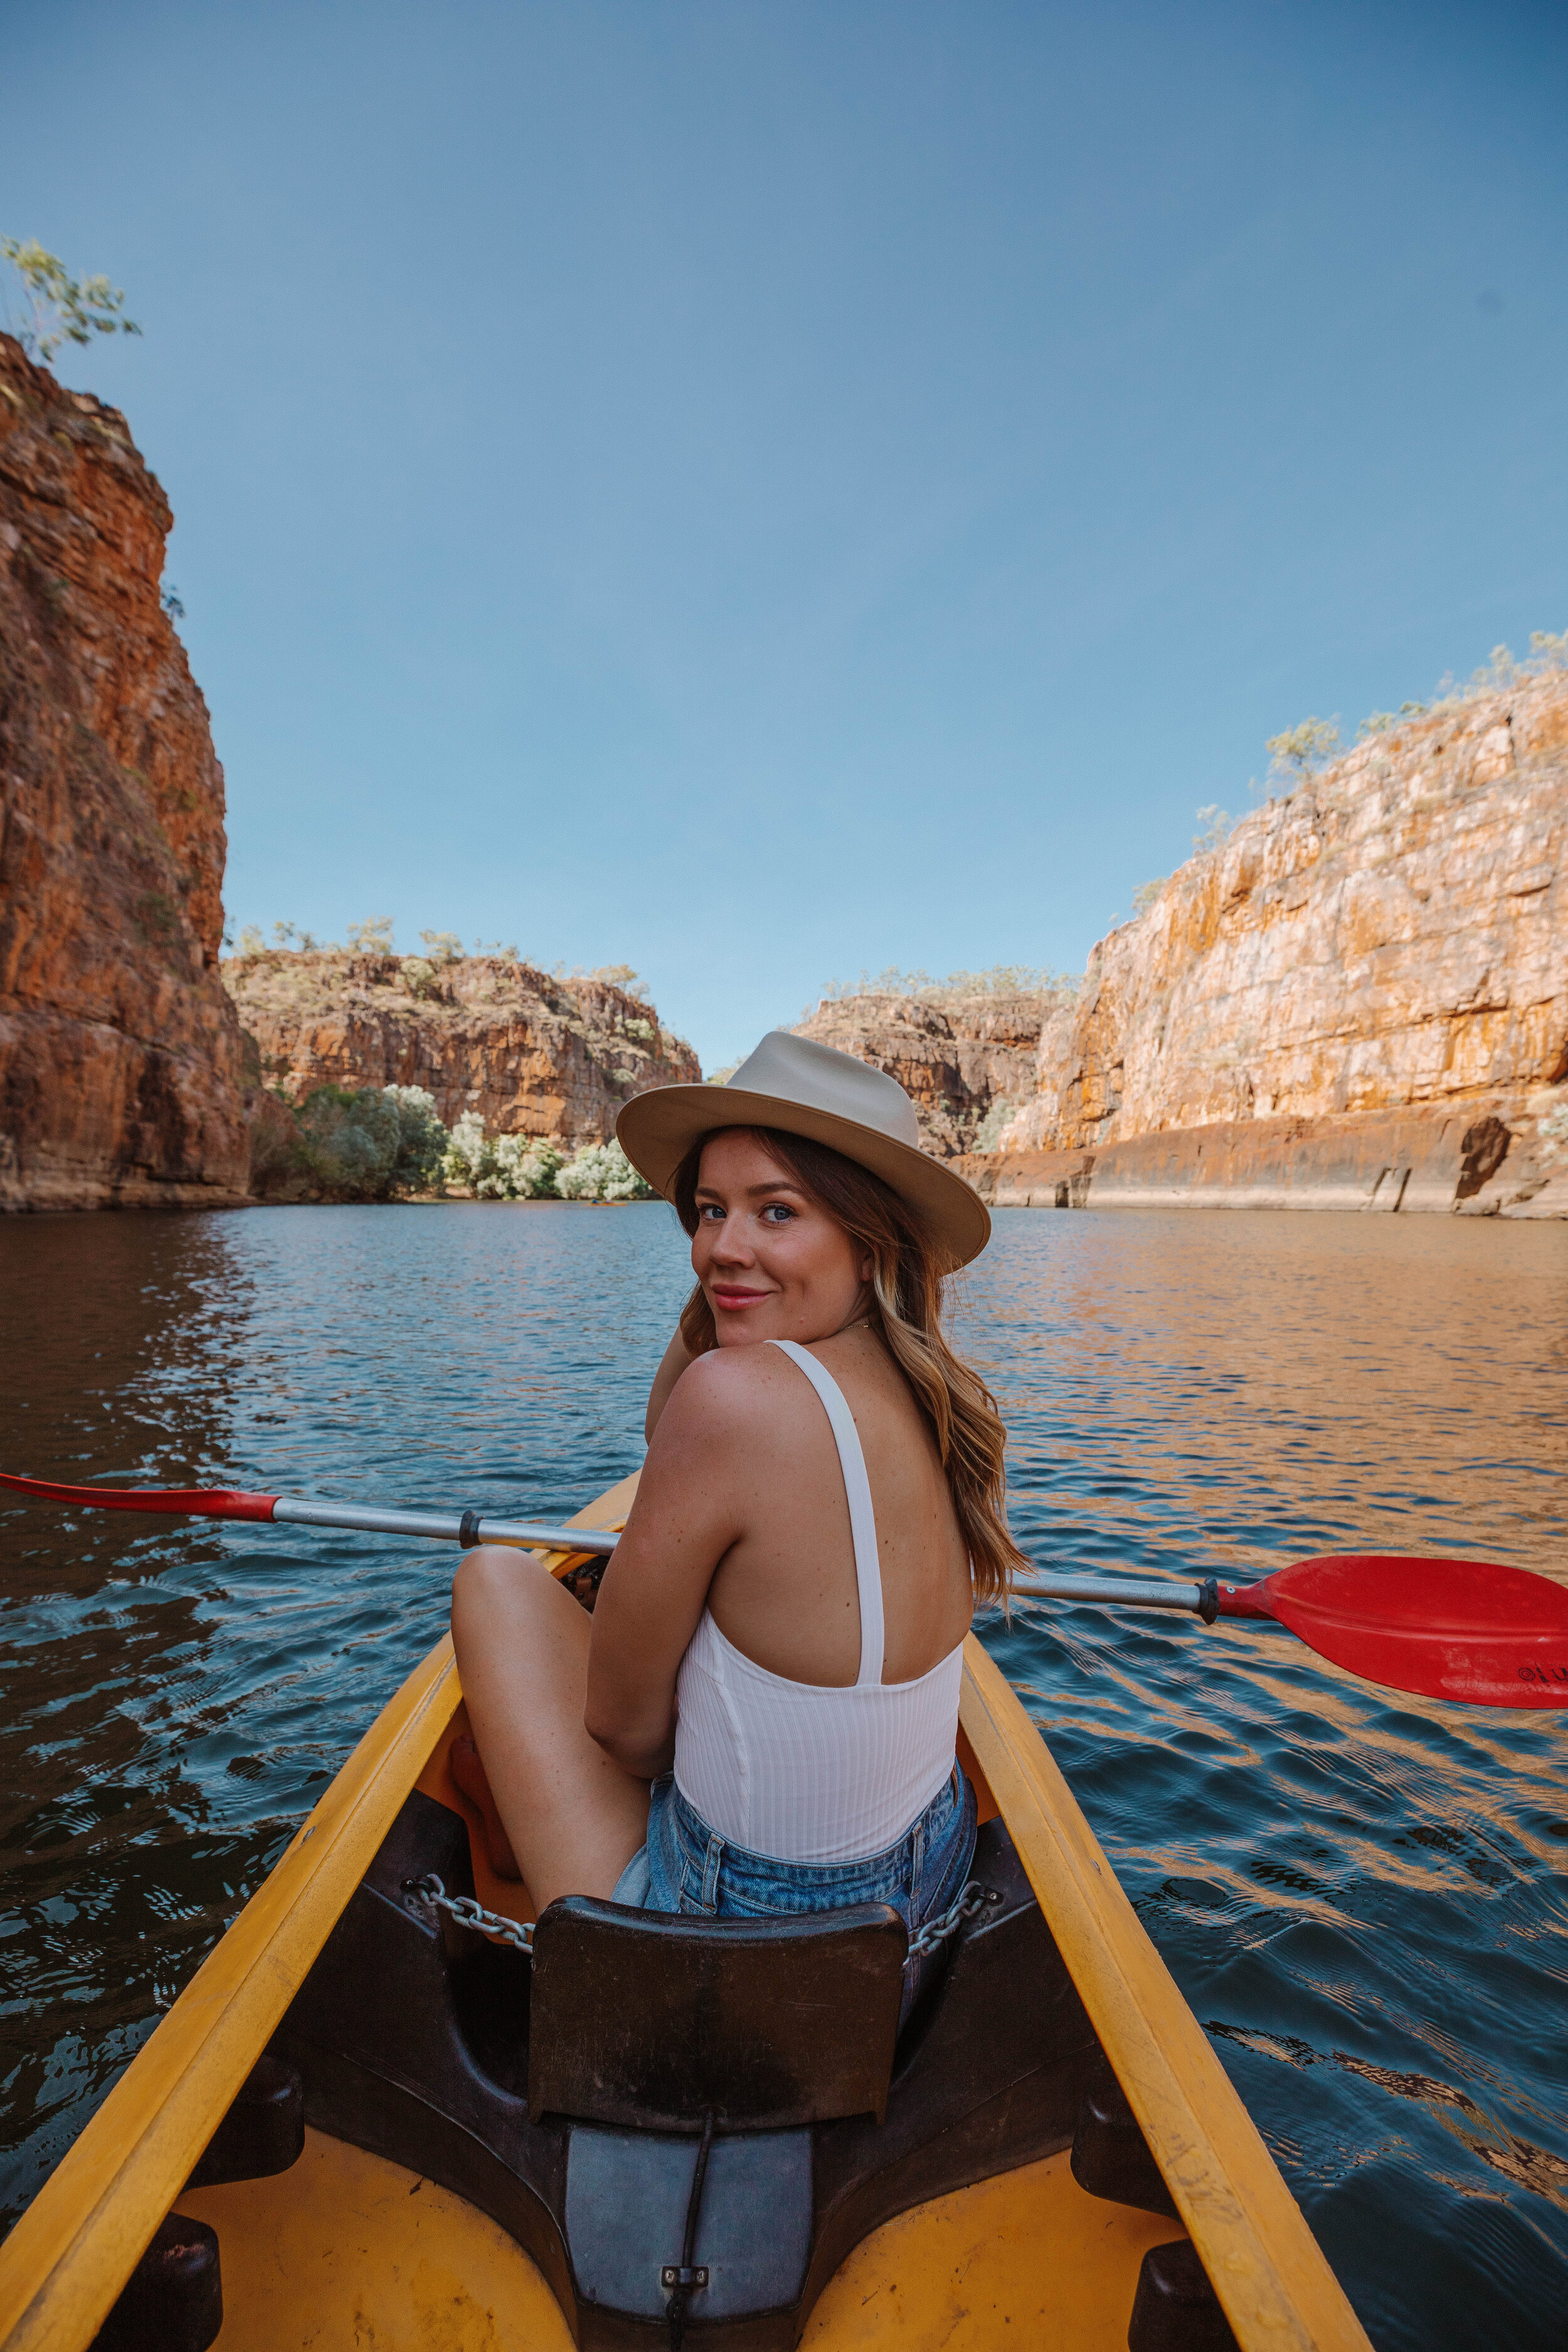 This one week Northern Territory road trip itinerary takes you through the best parts of the Top End Australia. Explore Kakadu National Park, Katherine Gorge and hot springs, and Litchfield National Park with lots of waterfalls, swimming holes, and …